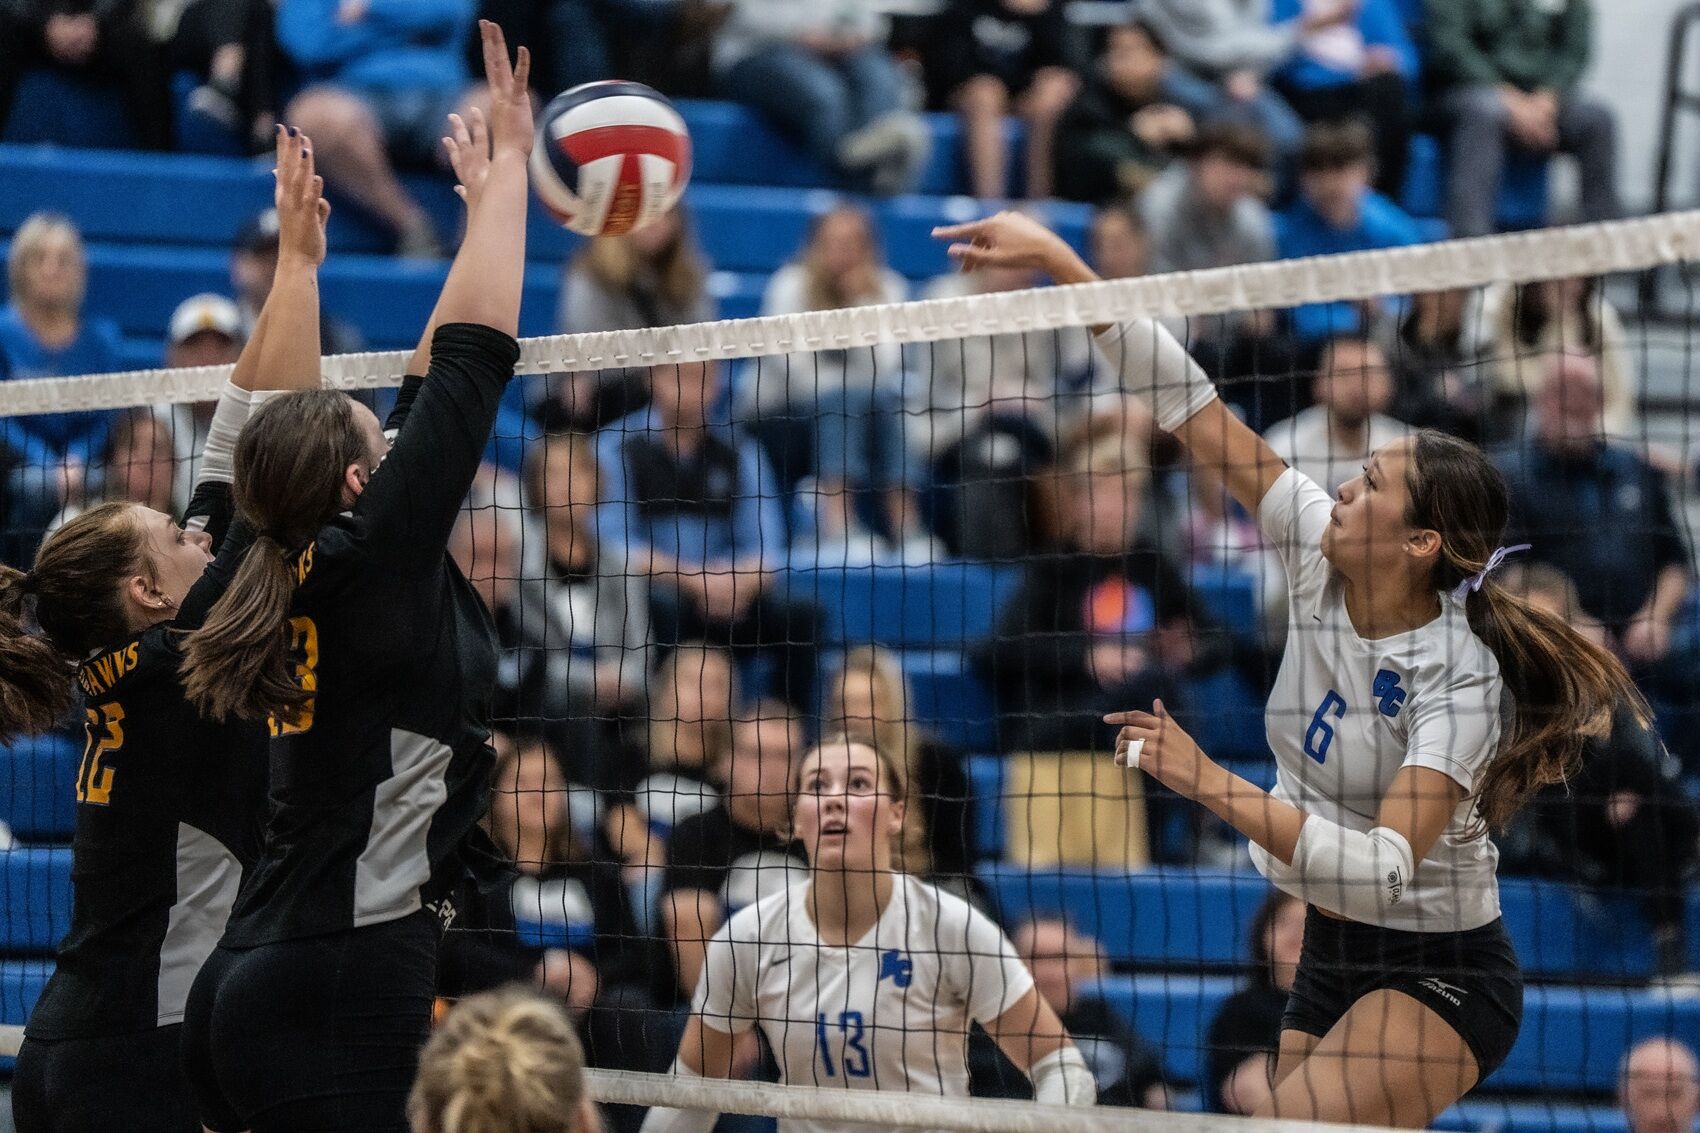 Brookfield Central dominates Germantown in Greater Metro Conference girls volleyball match